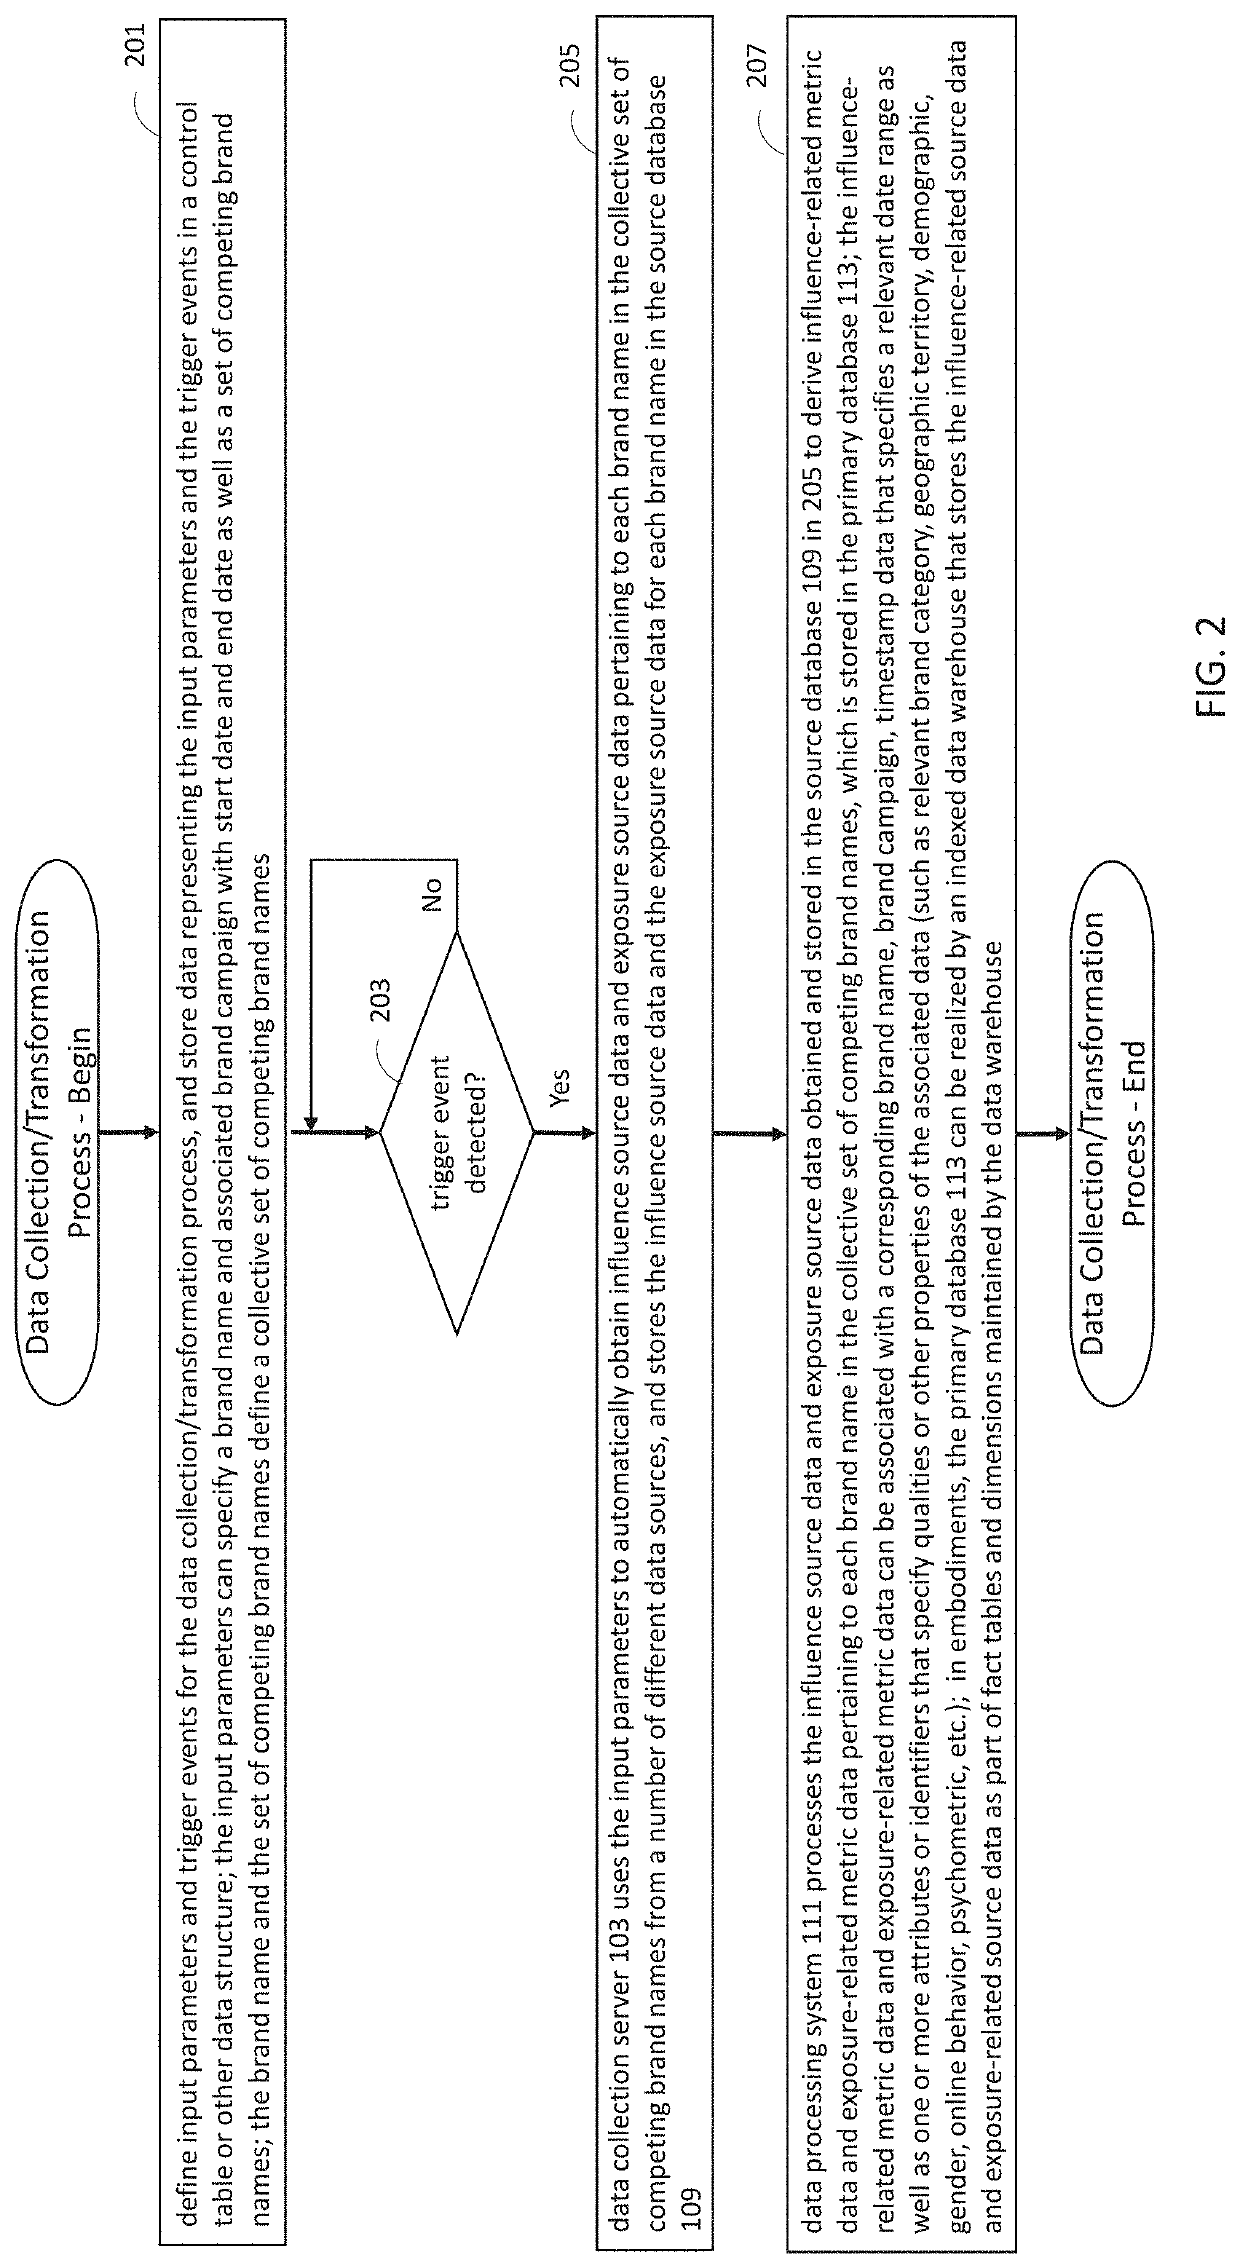 Methods and systems for monitoring brand performance based on consumer behavior metric data and expenditure data related to a competitive brand set over time